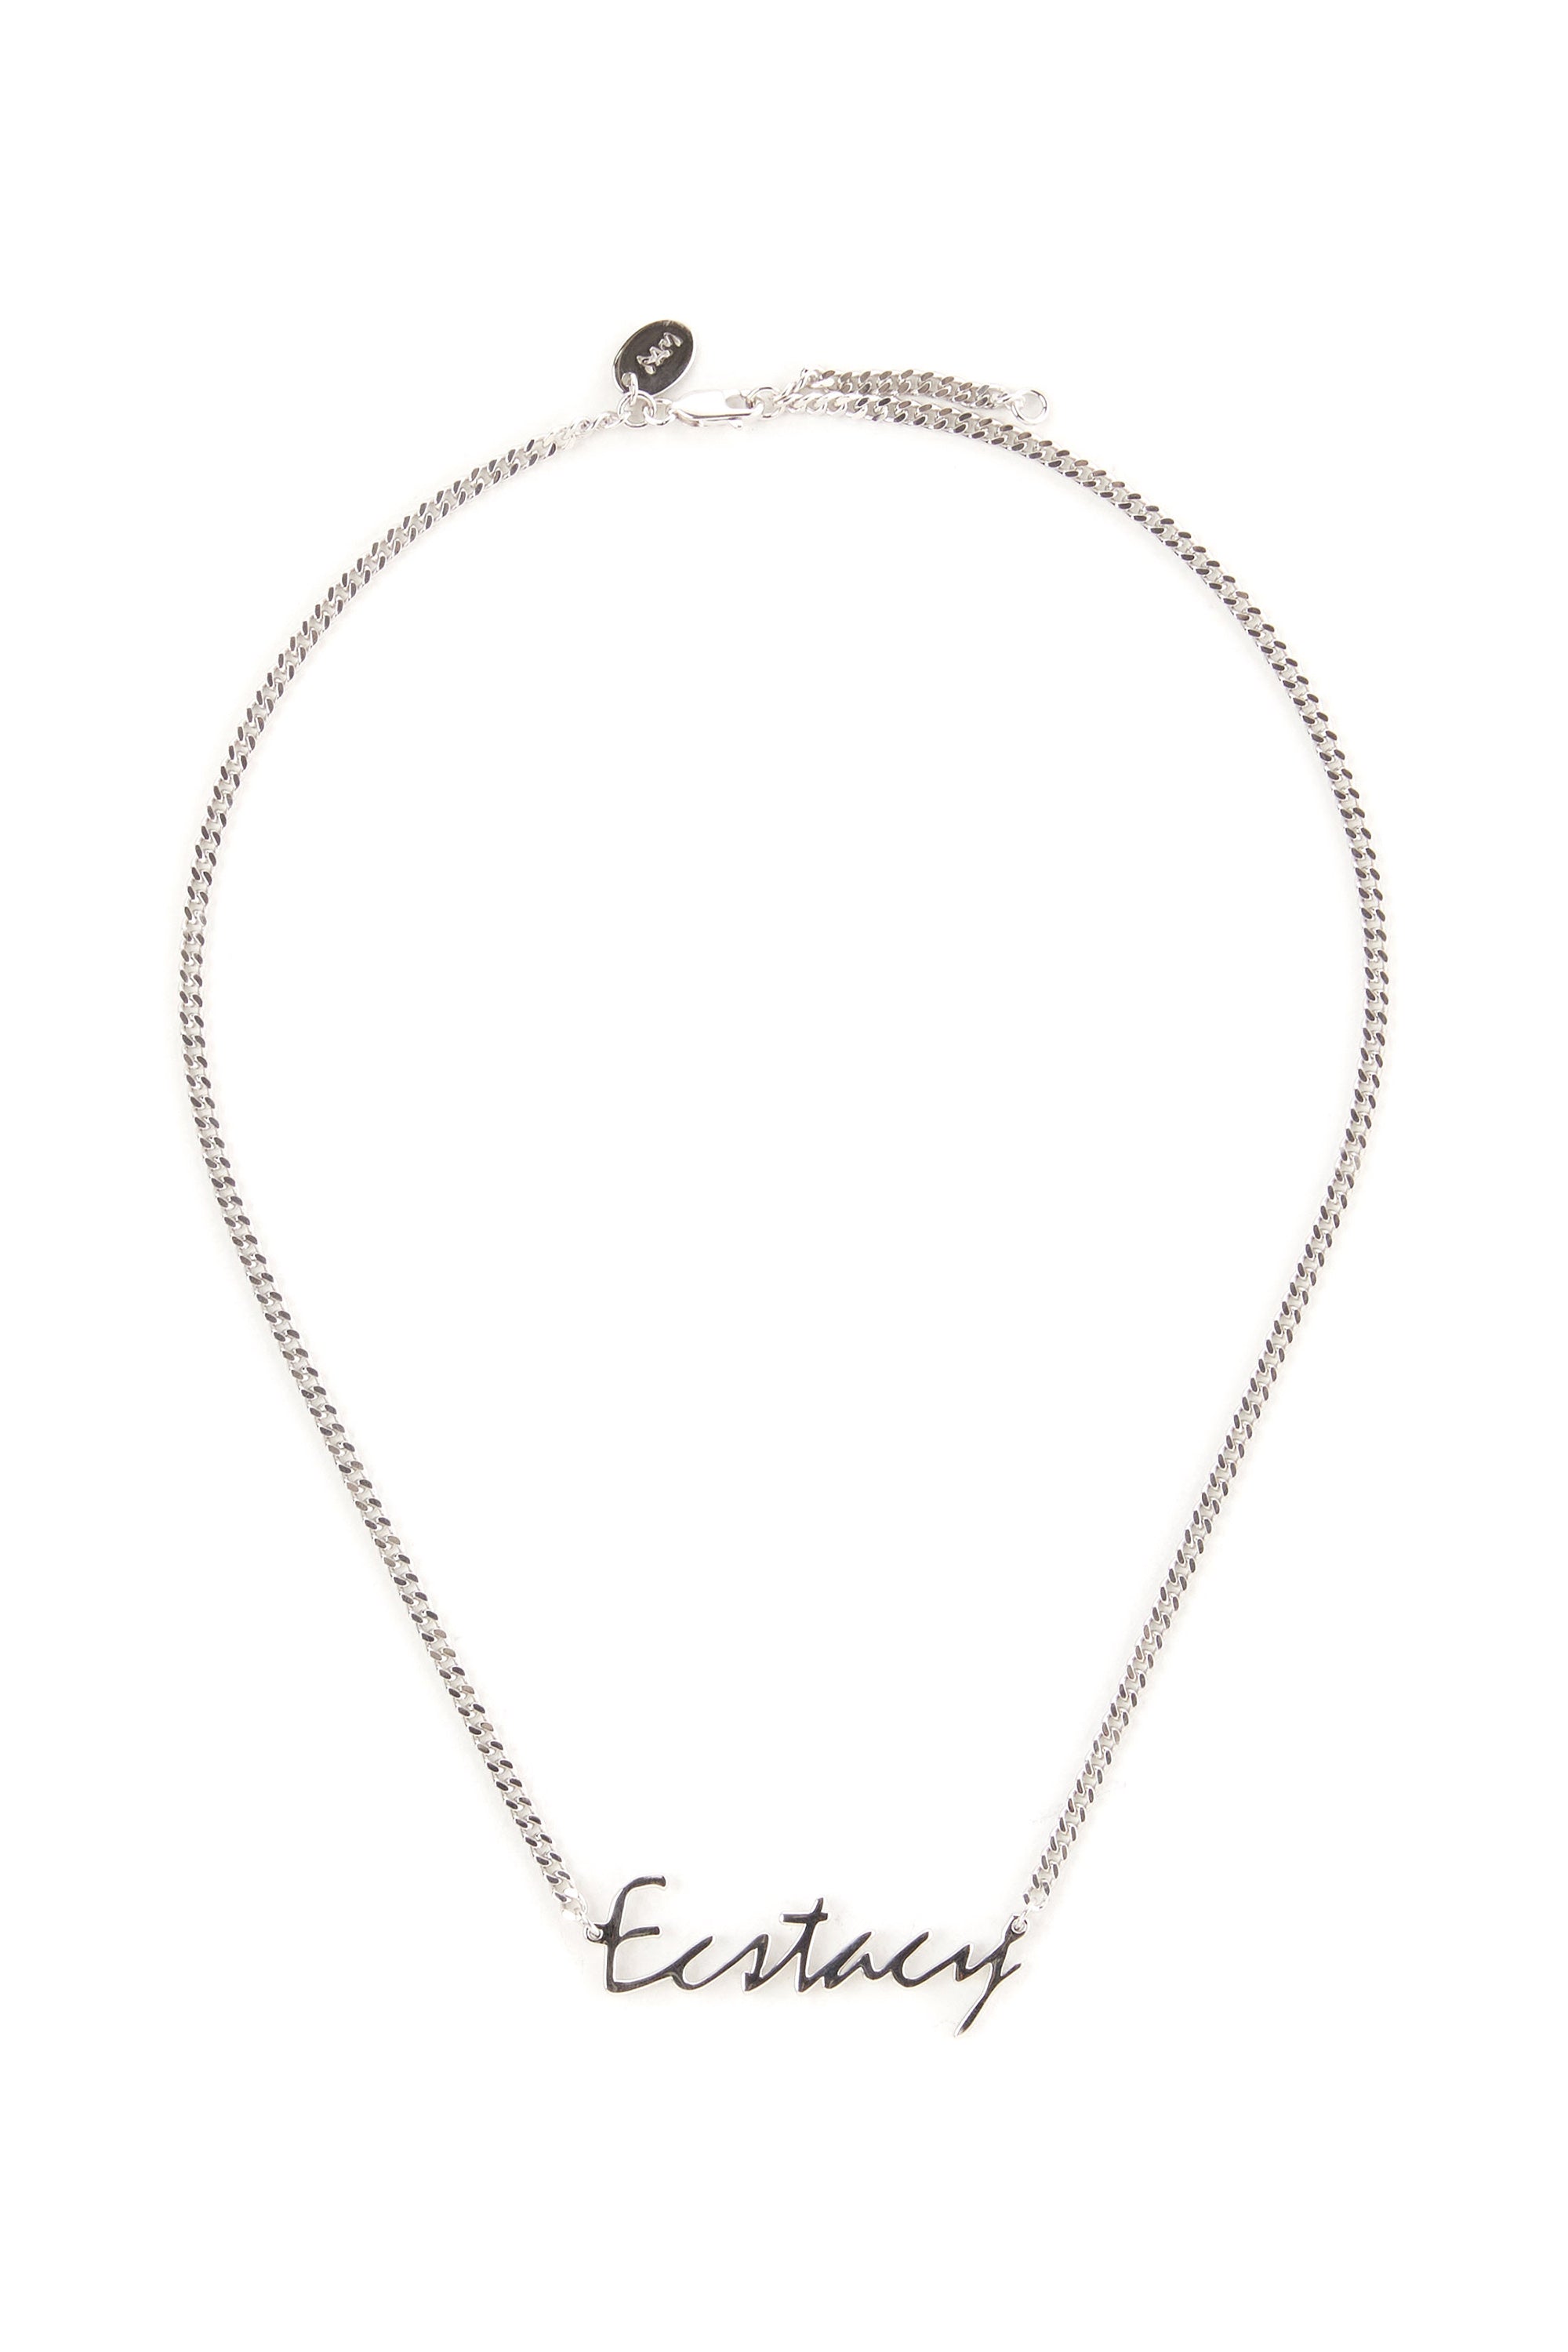 The P. WORLD SILVER ECSTACY NECKLACE  available online with global shipping, and in PAM Stores Melbourne and Sydney.